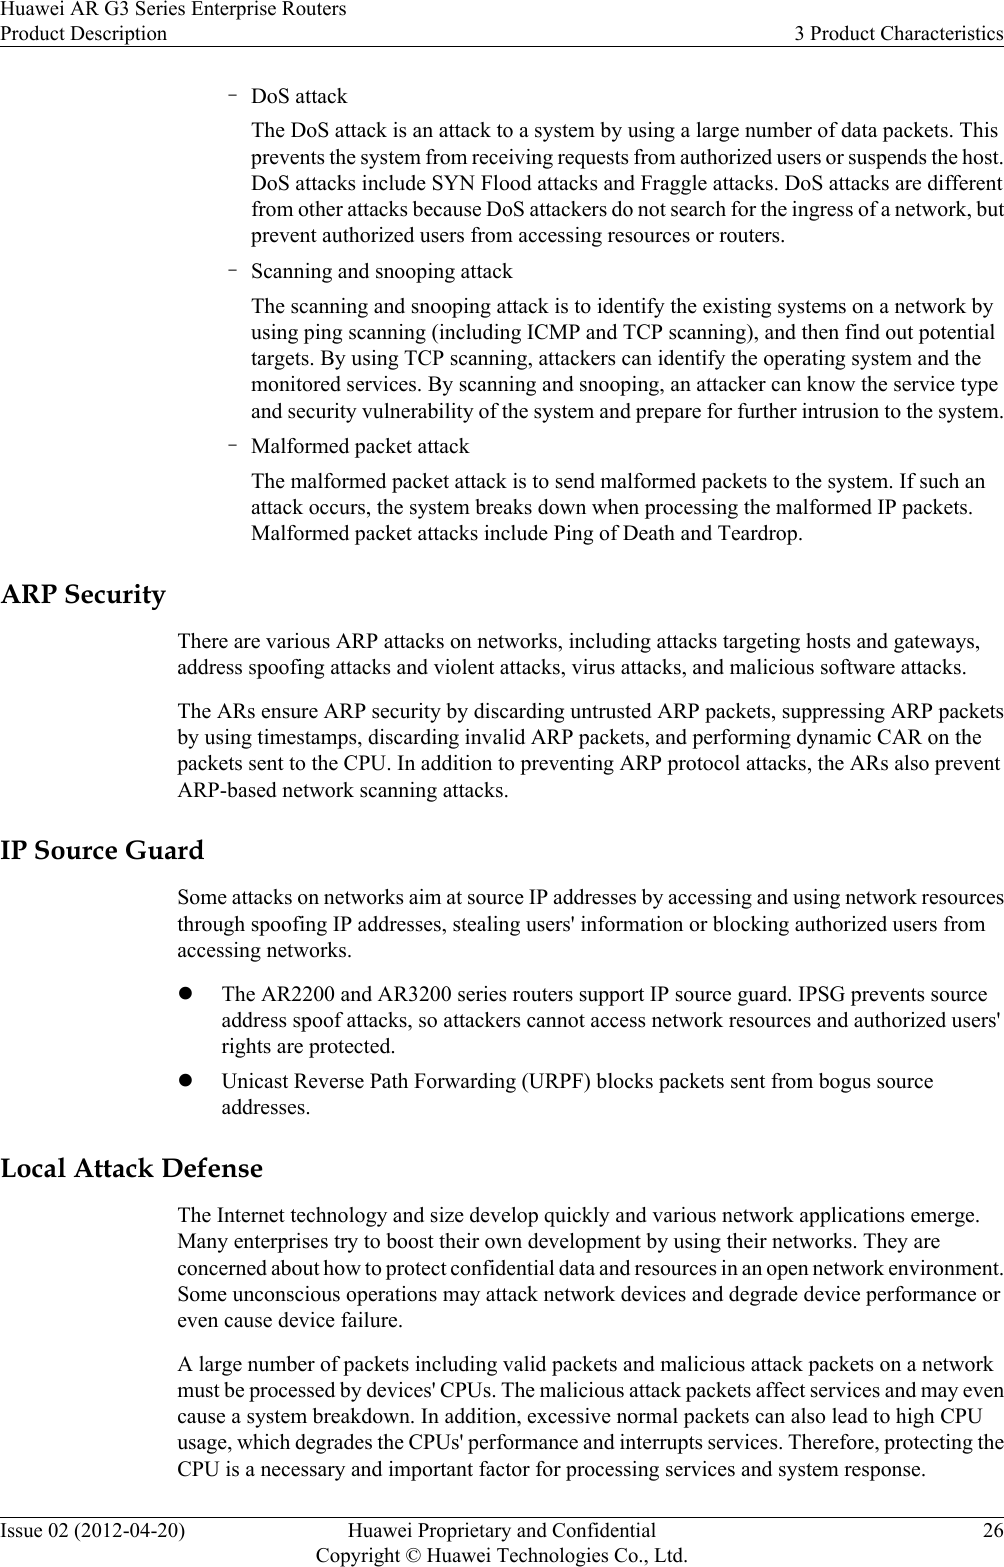 –DoS attackThe DoS attack is an attack to a system by using a large number of data packets. Thisprevents the system from receiving requests from authorized users or suspends the host.DoS attacks include SYN Flood attacks and Fraggle attacks. DoS attacks are differentfrom other attacks because DoS attackers do not search for the ingress of a network, butprevent authorized users from accessing resources or routers.–Scanning and snooping attackThe scanning and snooping attack is to identify the existing systems on a network byusing ping scanning (including ICMP and TCP scanning), and then find out potentialtargets. By using TCP scanning, attackers can identify the operating system and themonitored services. By scanning and snooping, an attacker can know the service typeand security vulnerability of the system and prepare for further intrusion to the system.–Malformed packet attackThe malformed packet attack is to send malformed packets to the system. If such anattack occurs, the system breaks down when processing the malformed IP packets.Malformed packet attacks include Ping of Death and Teardrop.ARP SecurityThere are various ARP attacks on networks, including attacks targeting hosts and gateways,address spoofing attacks and violent attacks, virus attacks, and malicious software attacks.The ARs ensure ARP security by discarding untrusted ARP packets, suppressing ARP packetsby using timestamps, discarding invalid ARP packets, and performing dynamic CAR on thepackets sent to the CPU. In addition to preventing ARP protocol attacks, the ARs also preventARP-based network scanning attacks.IP Source GuardSome attacks on networks aim at source IP addresses by accessing and using network resourcesthrough spoofing IP addresses, stealing users&apos; information or blocking authorized users fromaccessing networks.lThe AR2200 and AR3200 series routers support IP source guard. IPSG prevents sourceaddress spoof attacks, so attackers cannot access network resources and authorized users&apos;rights are protected.lUnicast Reverse Path Forwarding (URPF) blocks packets sent from bogus sourceaddresses.Local Attack DefenseThe Internet technology and size develop quickly and various network applications emerge.Many enterprises try to boost their own development by using their networks. They areconcerned about how to protect confidential data and resources in an open network environment.Some unconscious operations may attack network devices and degrade device performance oreven cause device failure.A large number of packets including valid packets and malicious attack packets on a networkmust be processed by devices&apos; CPUs. The malicious attack packets affect services and may evencause a system breakdown. In addition, excessive normal packets can also lead to high CPUusage, which degrades the CPUs&apos; performance and interrupts services. Therefore, protecting theCPU is a necessary and important factor for processing services and system response.Huawei AR G3 Series Enterprise RoutersProduct Description 3 Product CharacteristicsIssue 02 (2012-04-20) Huawei Proprietary and ConfidentialCopyright © Huawei Technologies Co., Ltd.26